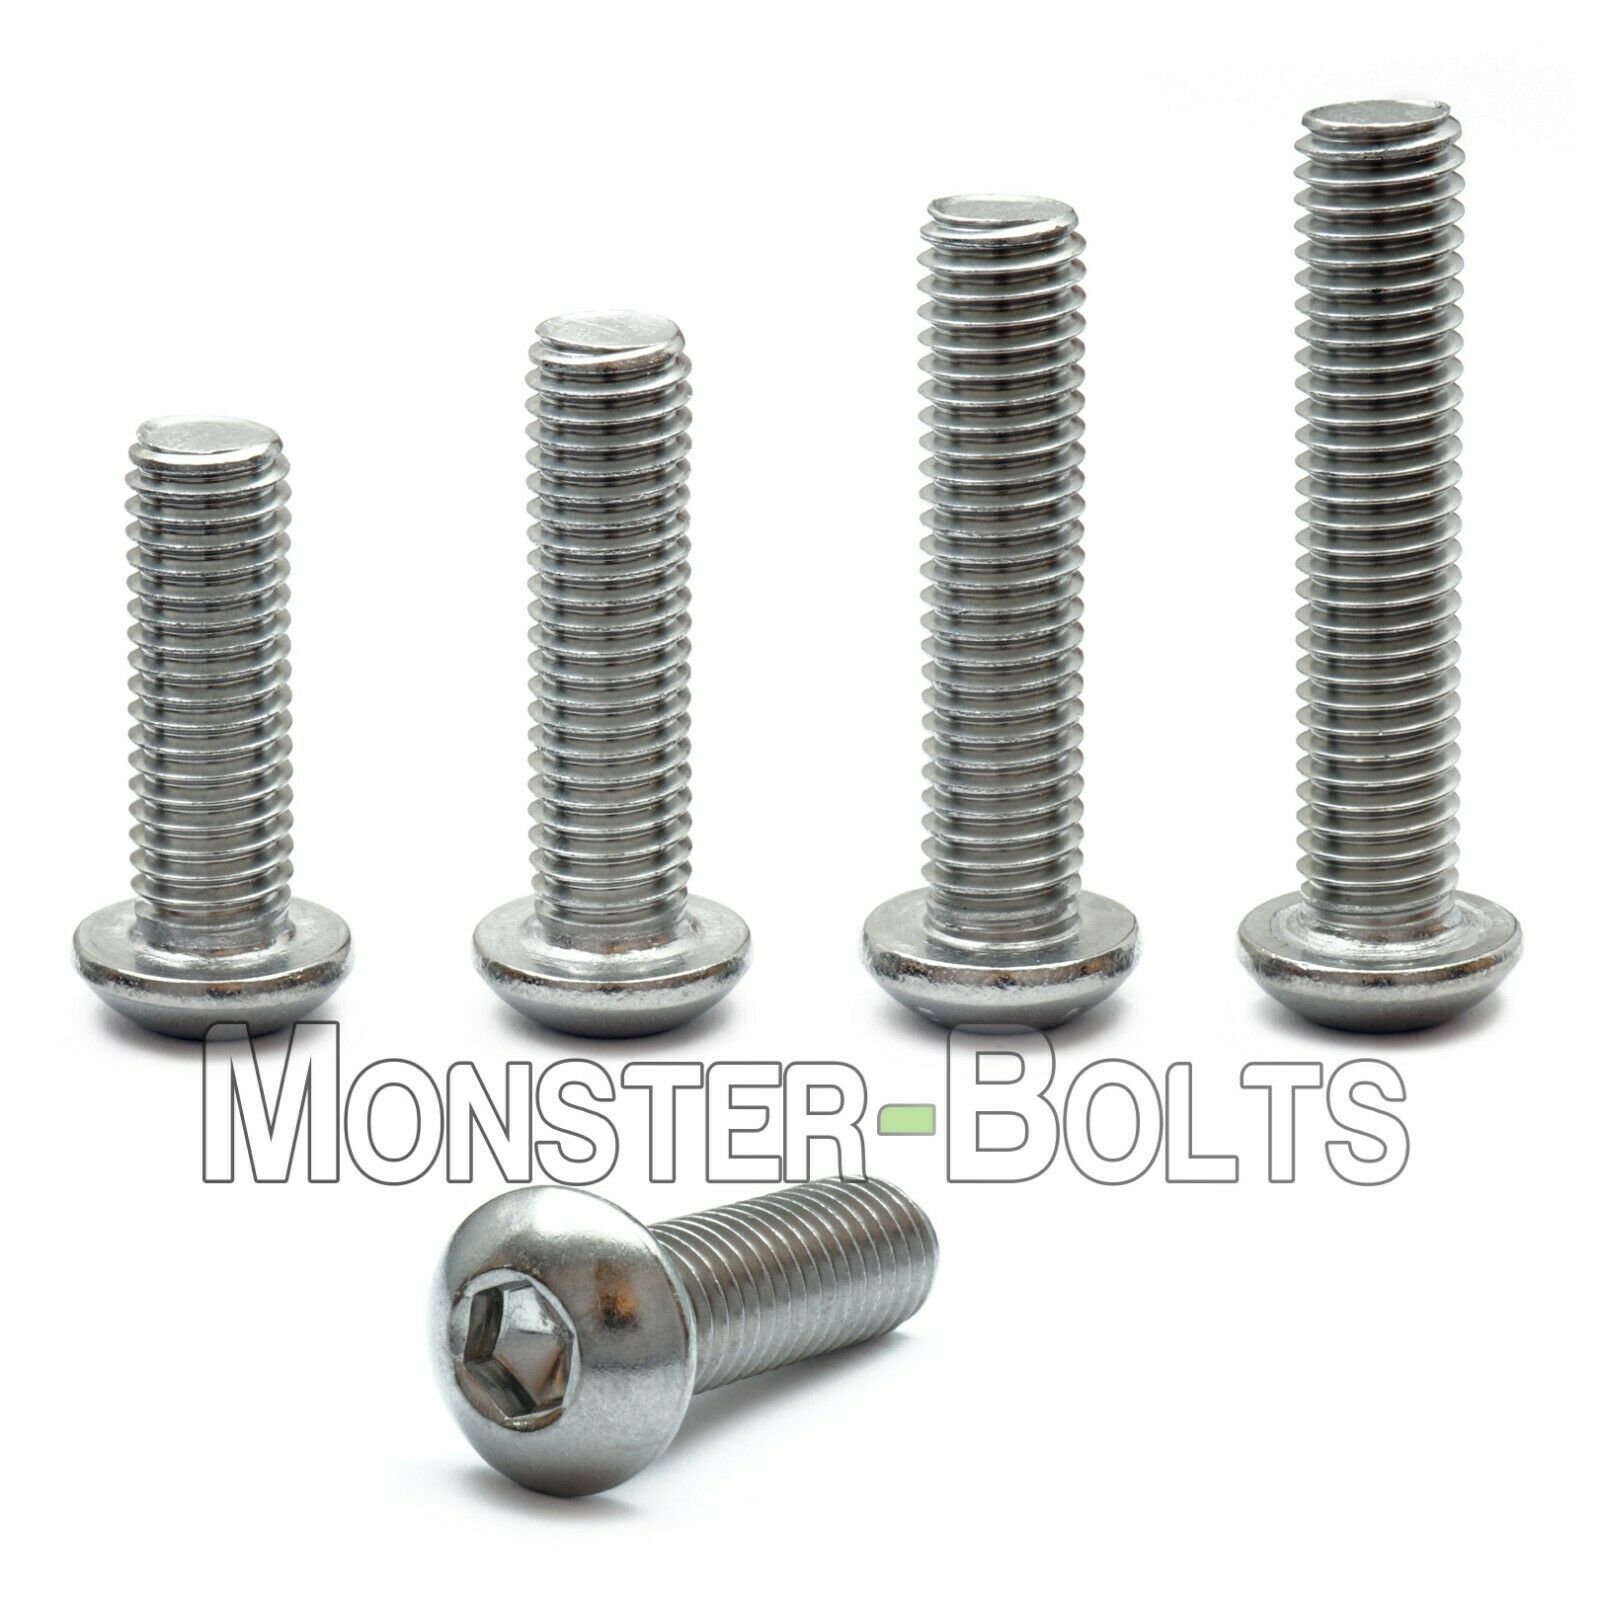 M5 Stainless Steel Button Head Socket Cap Screws A2, Metric Iso 7380 0.80 Coarse